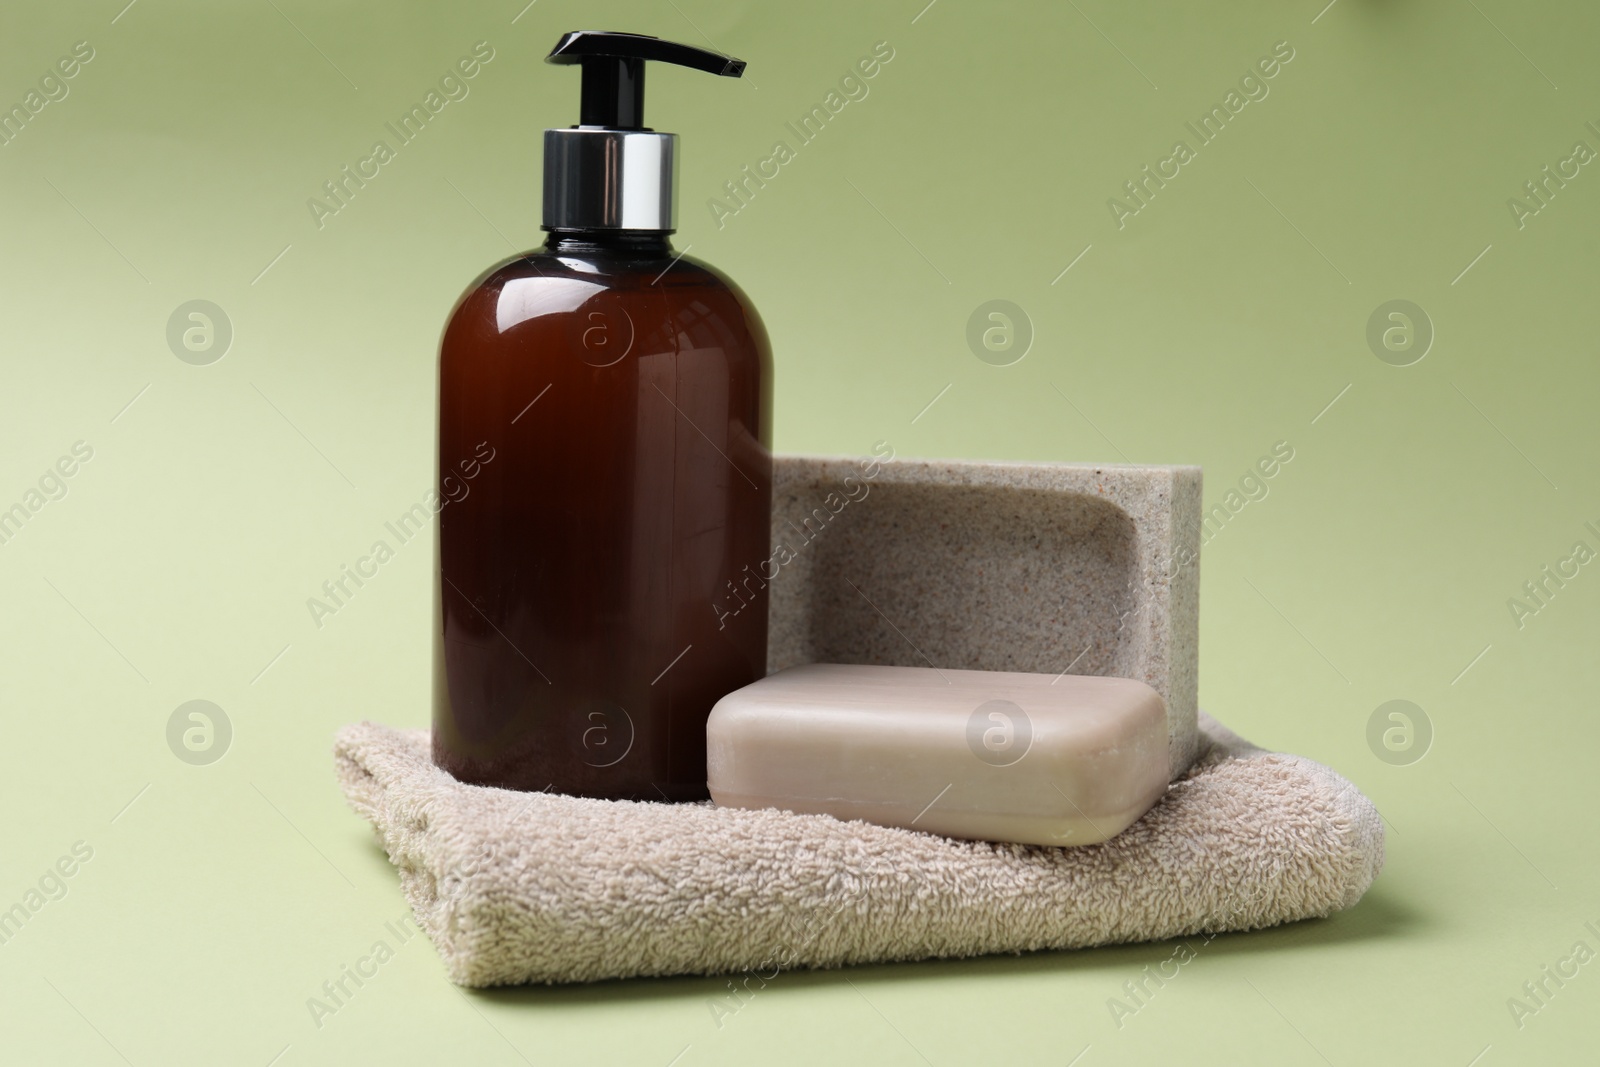 Photo of Soap bar, bottle dispenser and towel on green background